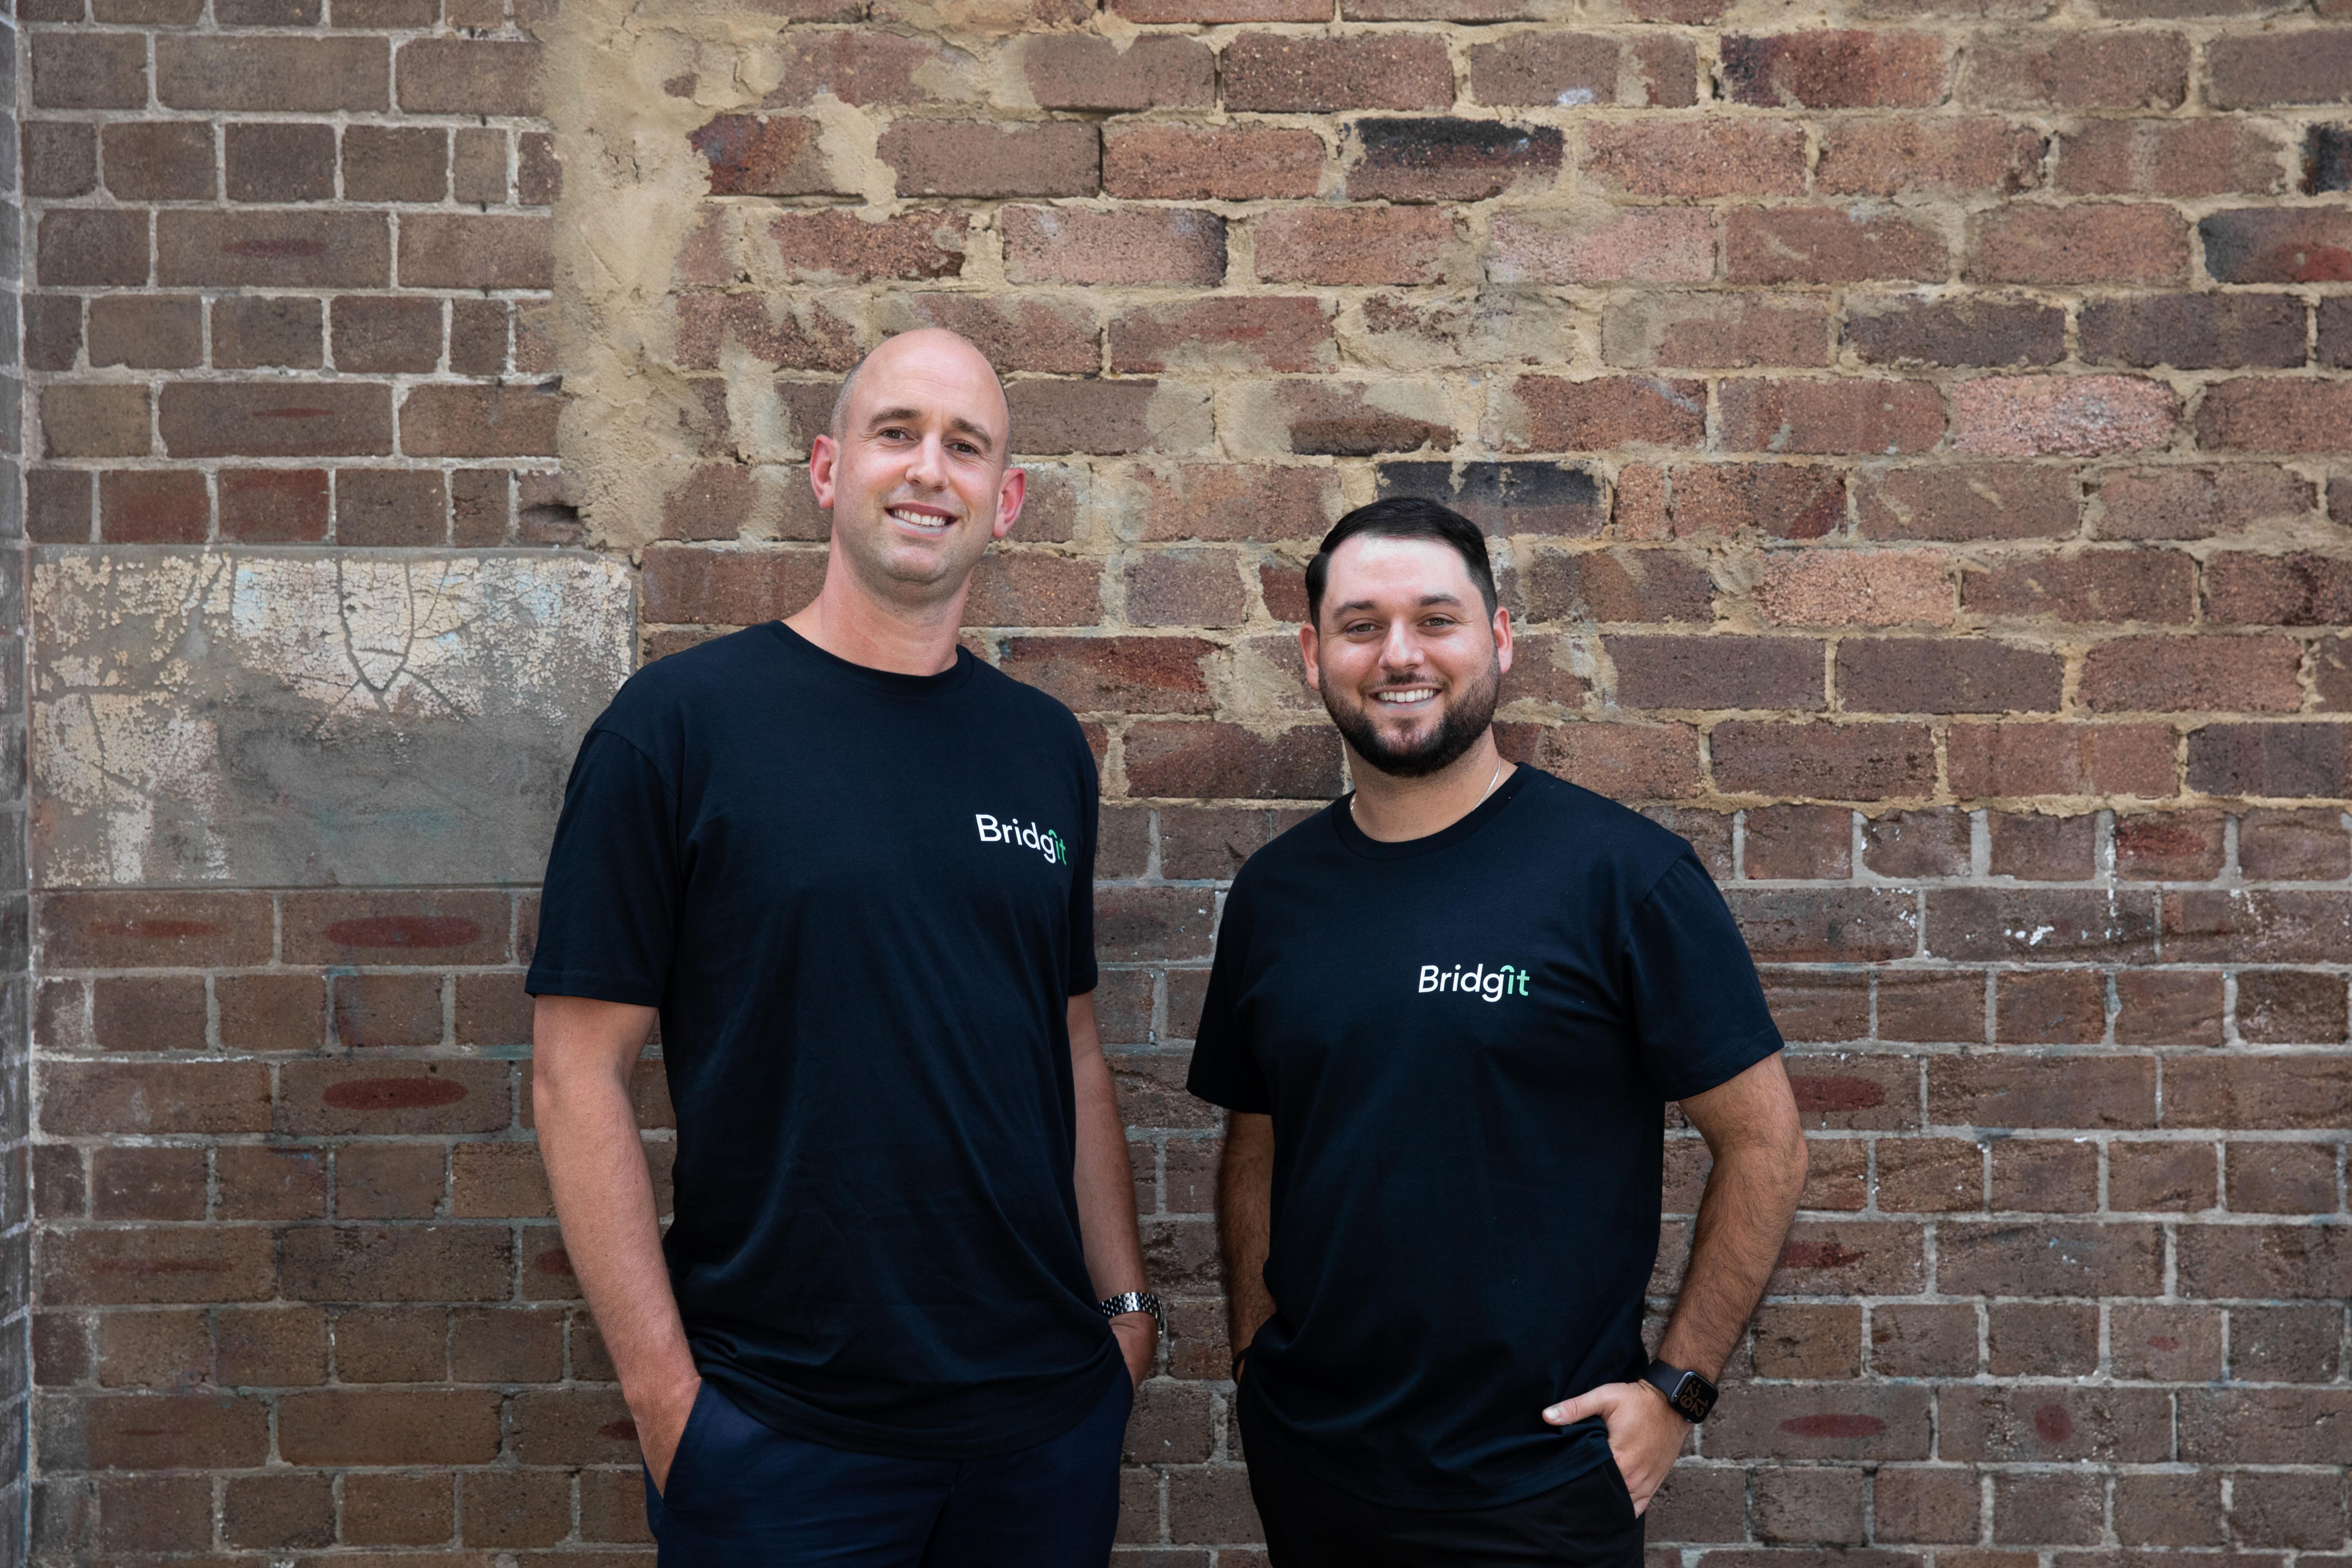 Fintech start-up Bridgit taps into housing volatility to process $1b in bridging loans in a year